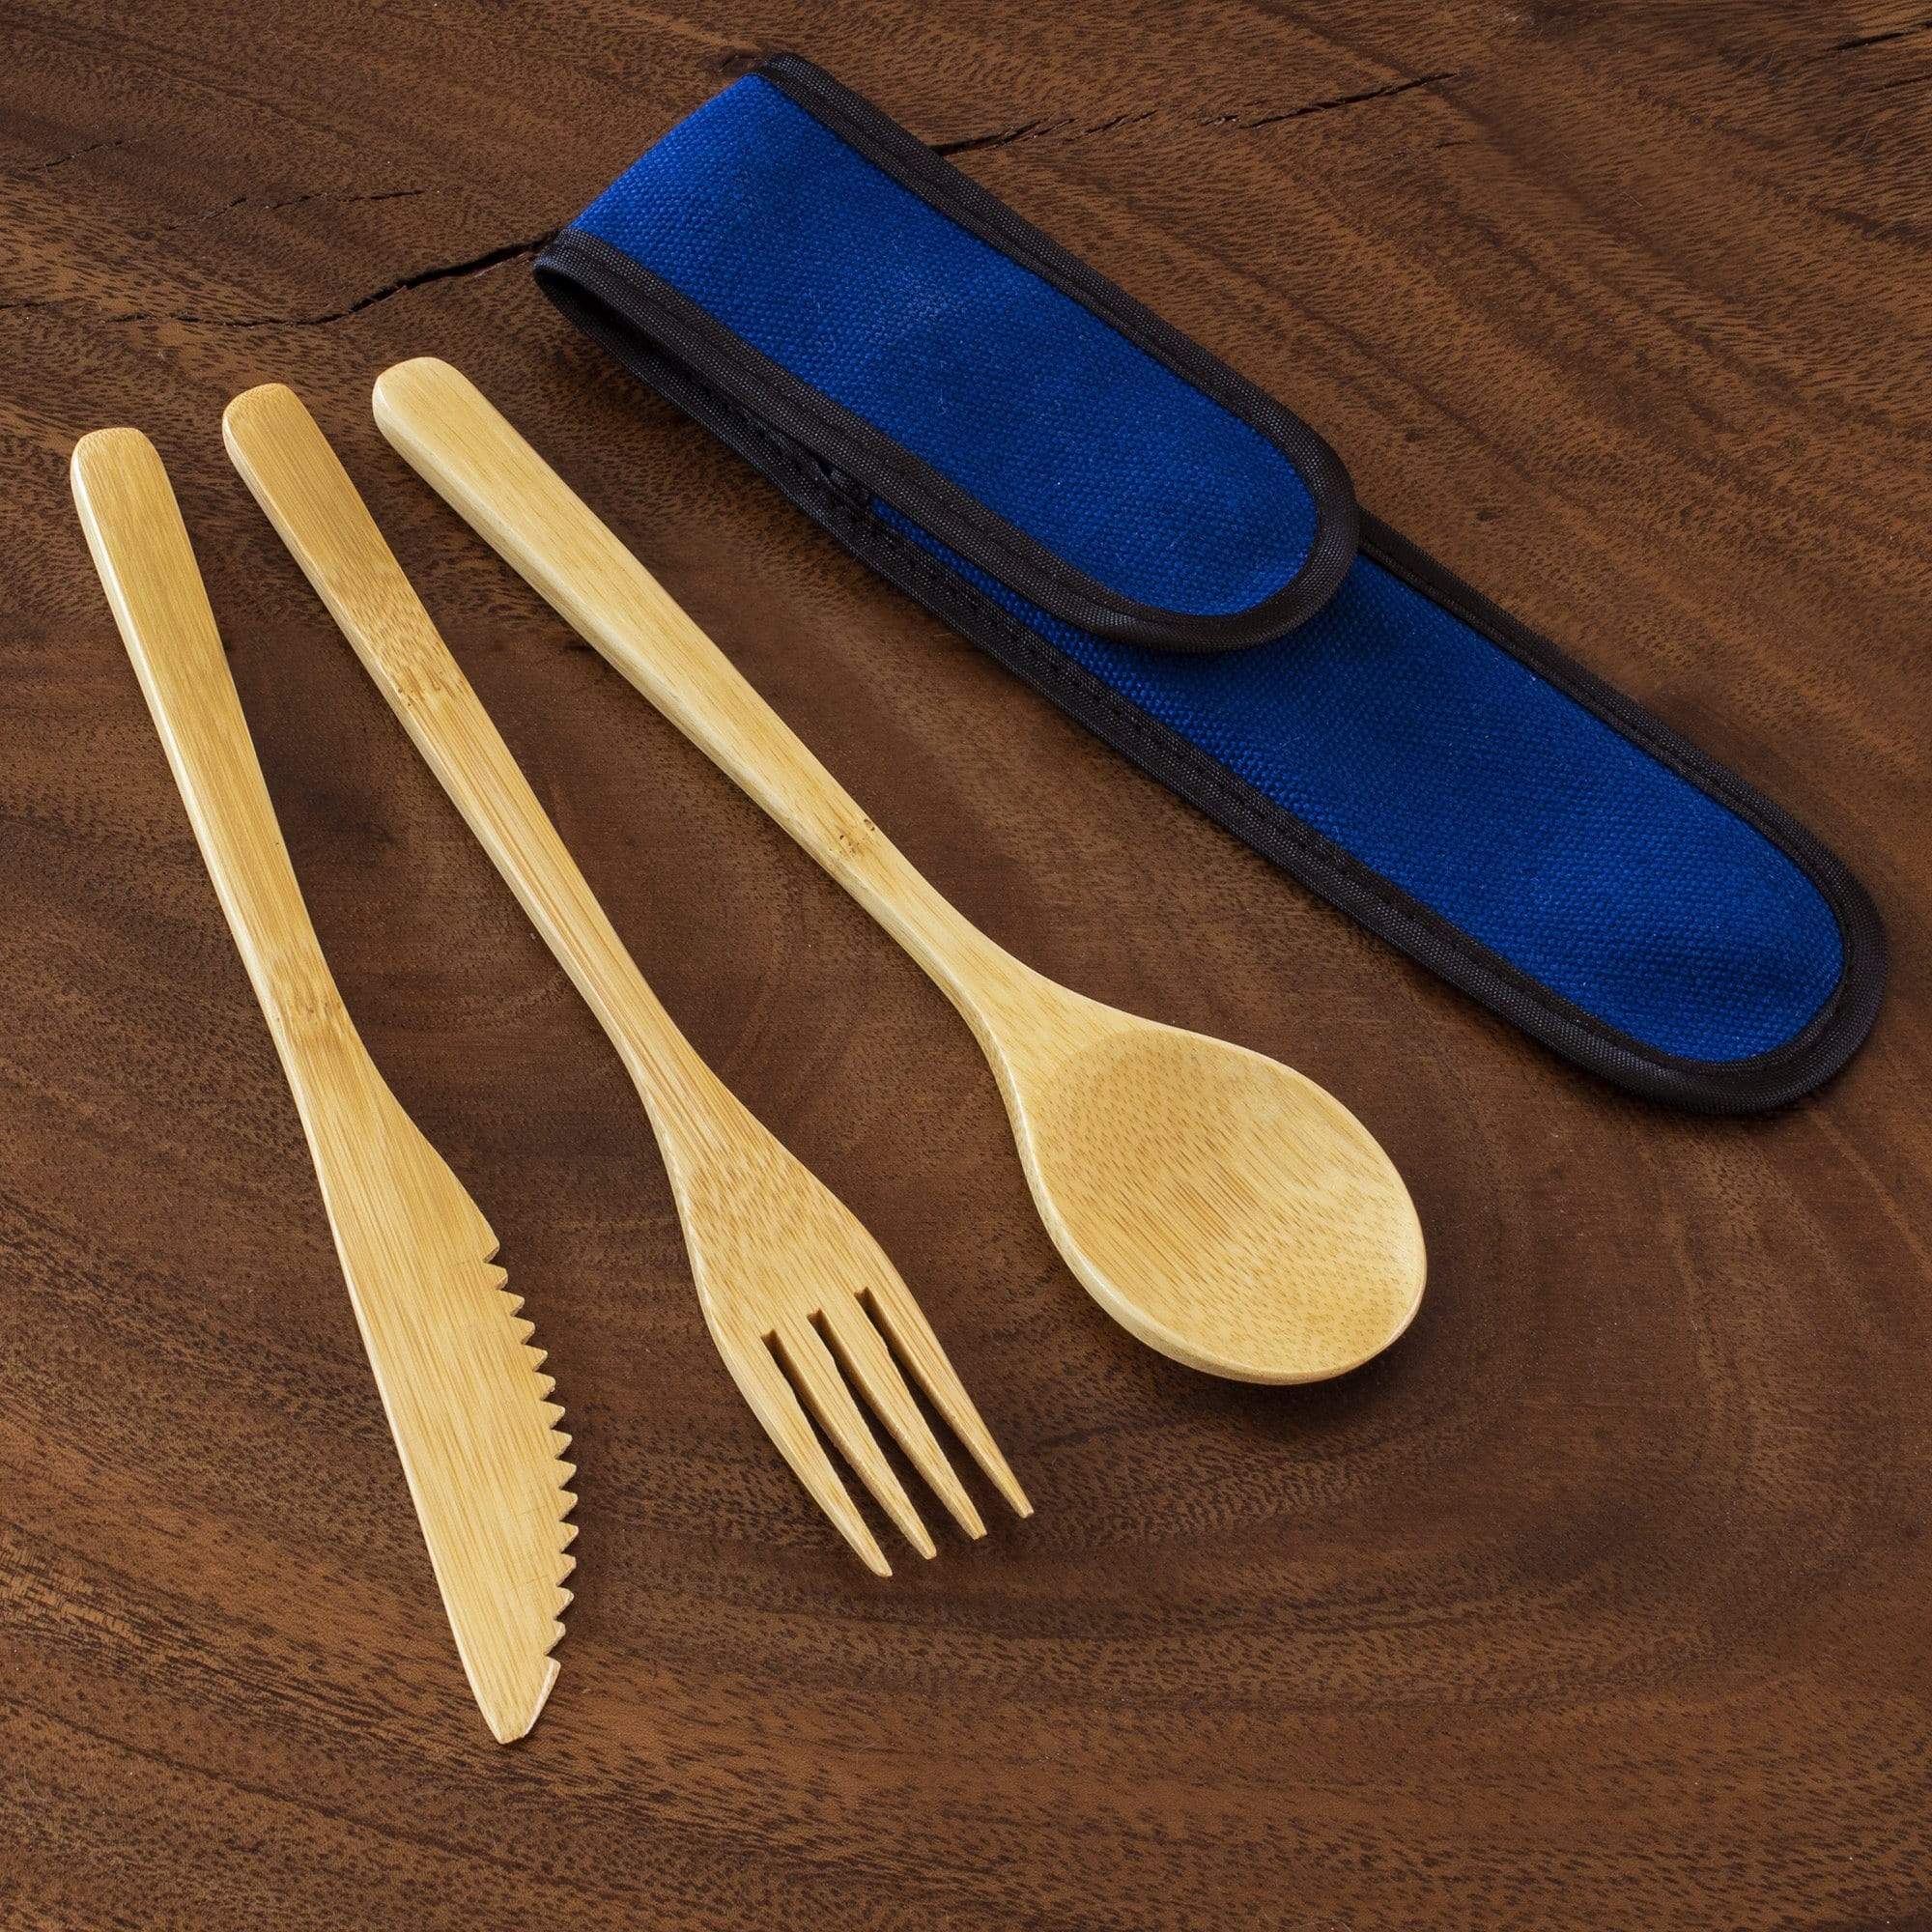 https://totallybamboo.com/cdn/shop/products/totally-bamboo-take-along-reusable-utensil-set-with-blue-travel-case-includes-bamboo-spoon-fork-knife-dishwasher-safe-totally-bamboo-159914.jpg?v=1628051090